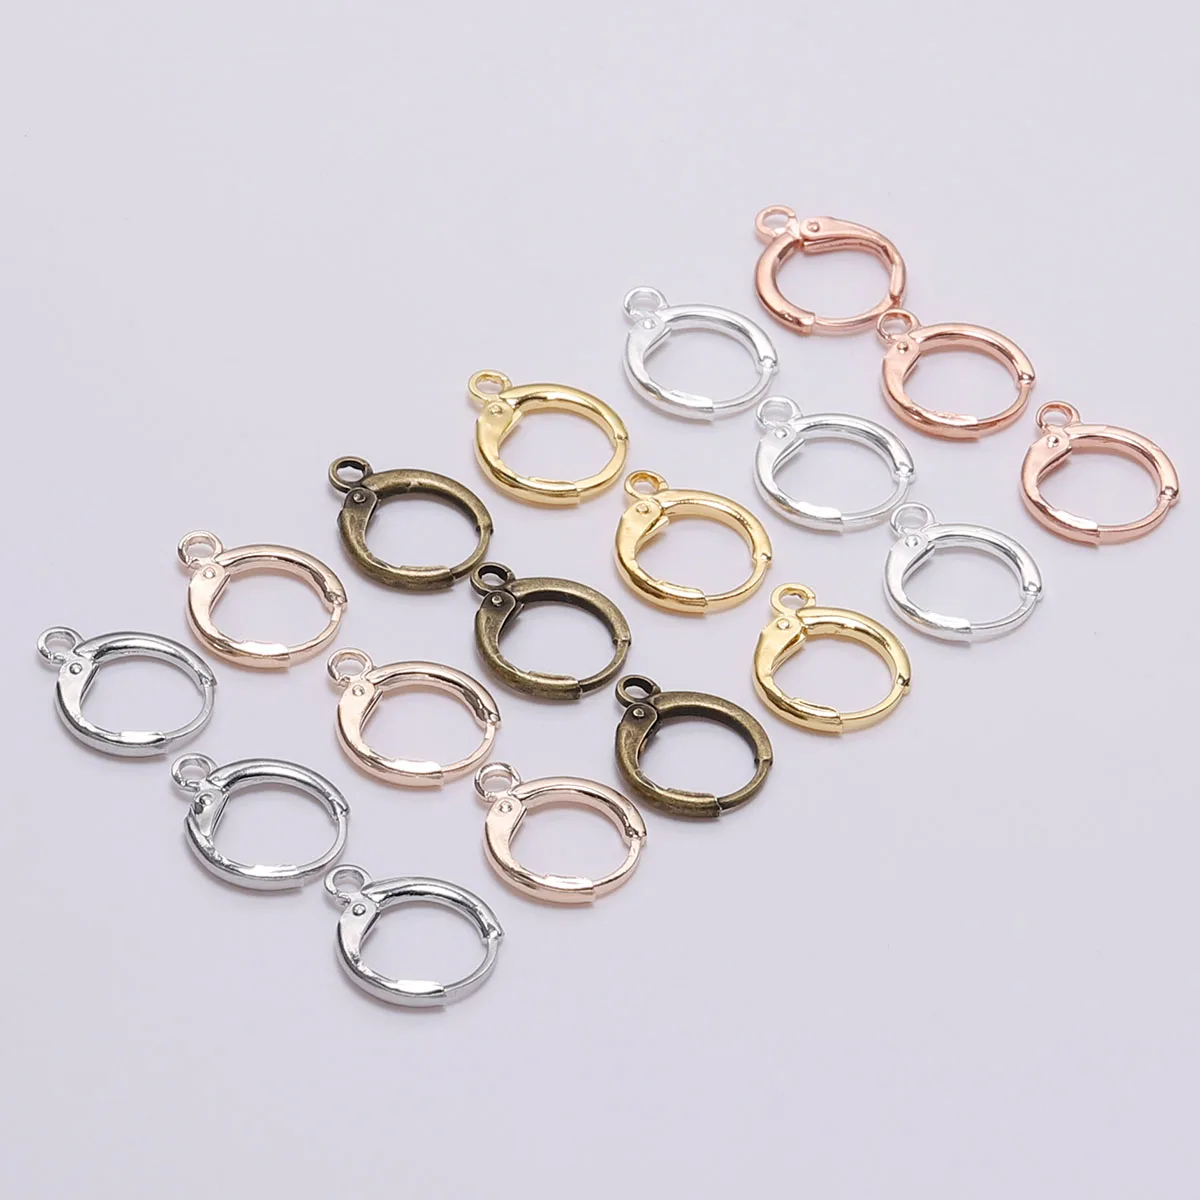 

20pcs14*12mm Thicker Gold Bronze French Lever Earring Hooks Wire Settings Base Hoops Earrings For DIY Jewelry Making Supplie, As picture